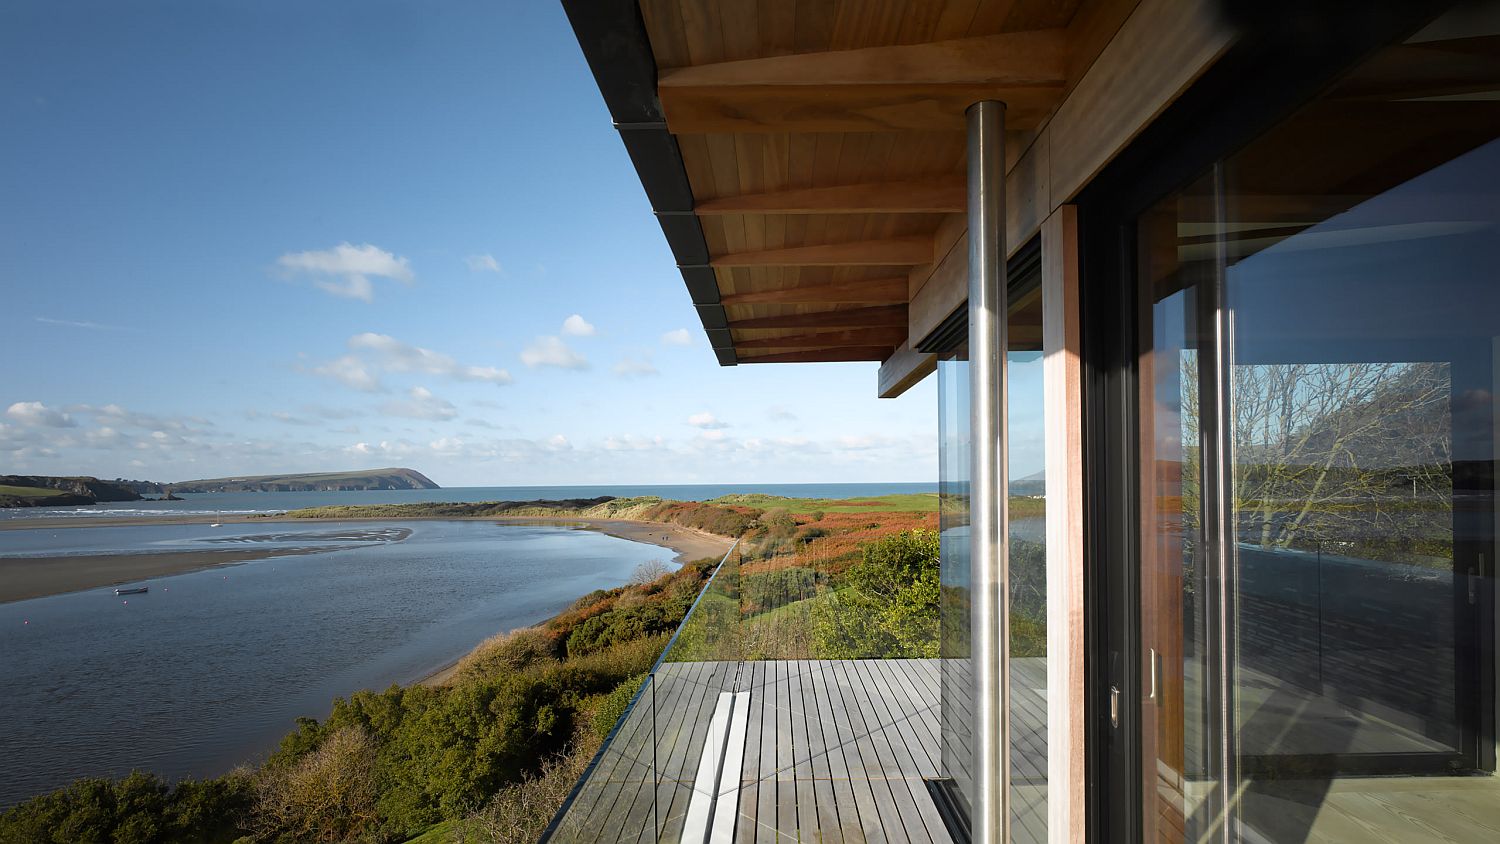 Deck of the house offers unabated views of the landscape